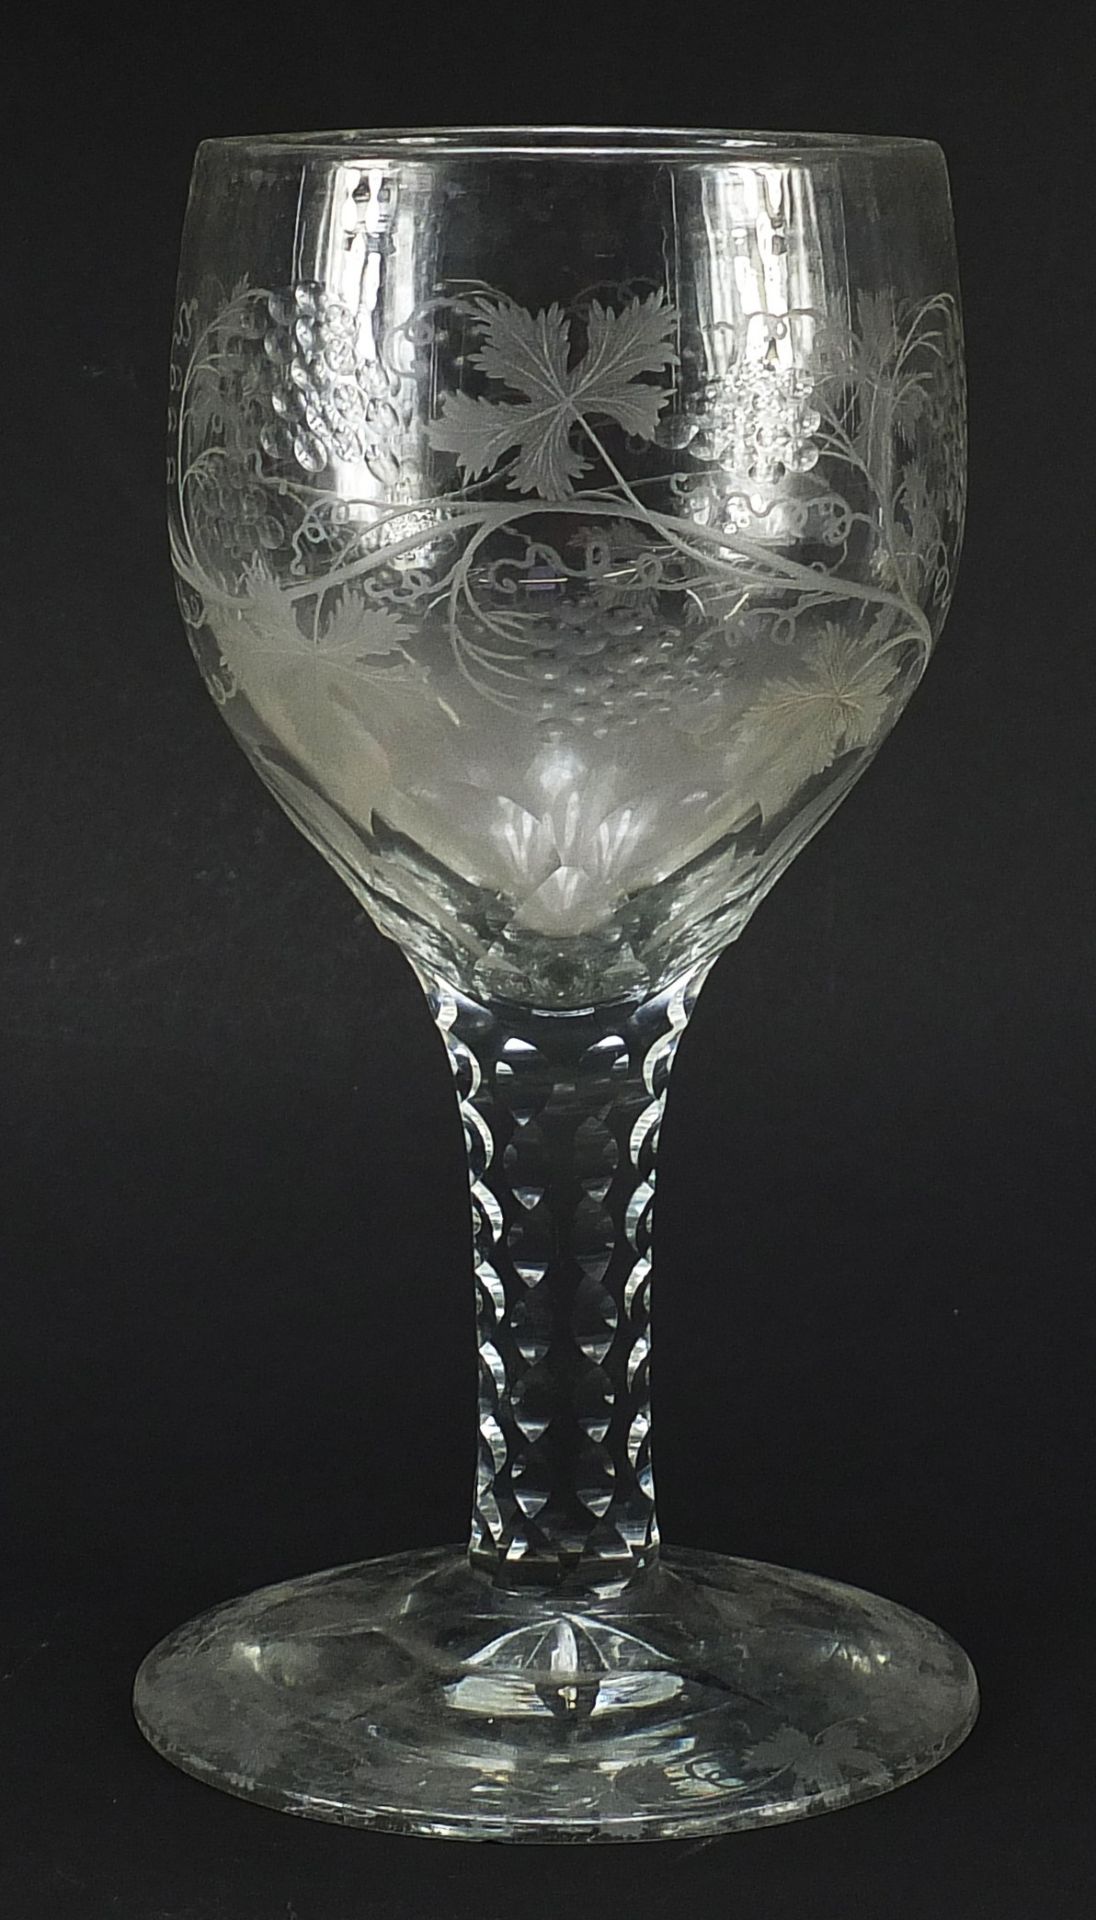 Large 18th century glass goblet with facetted stem etched with leaves and berries, 25cm high